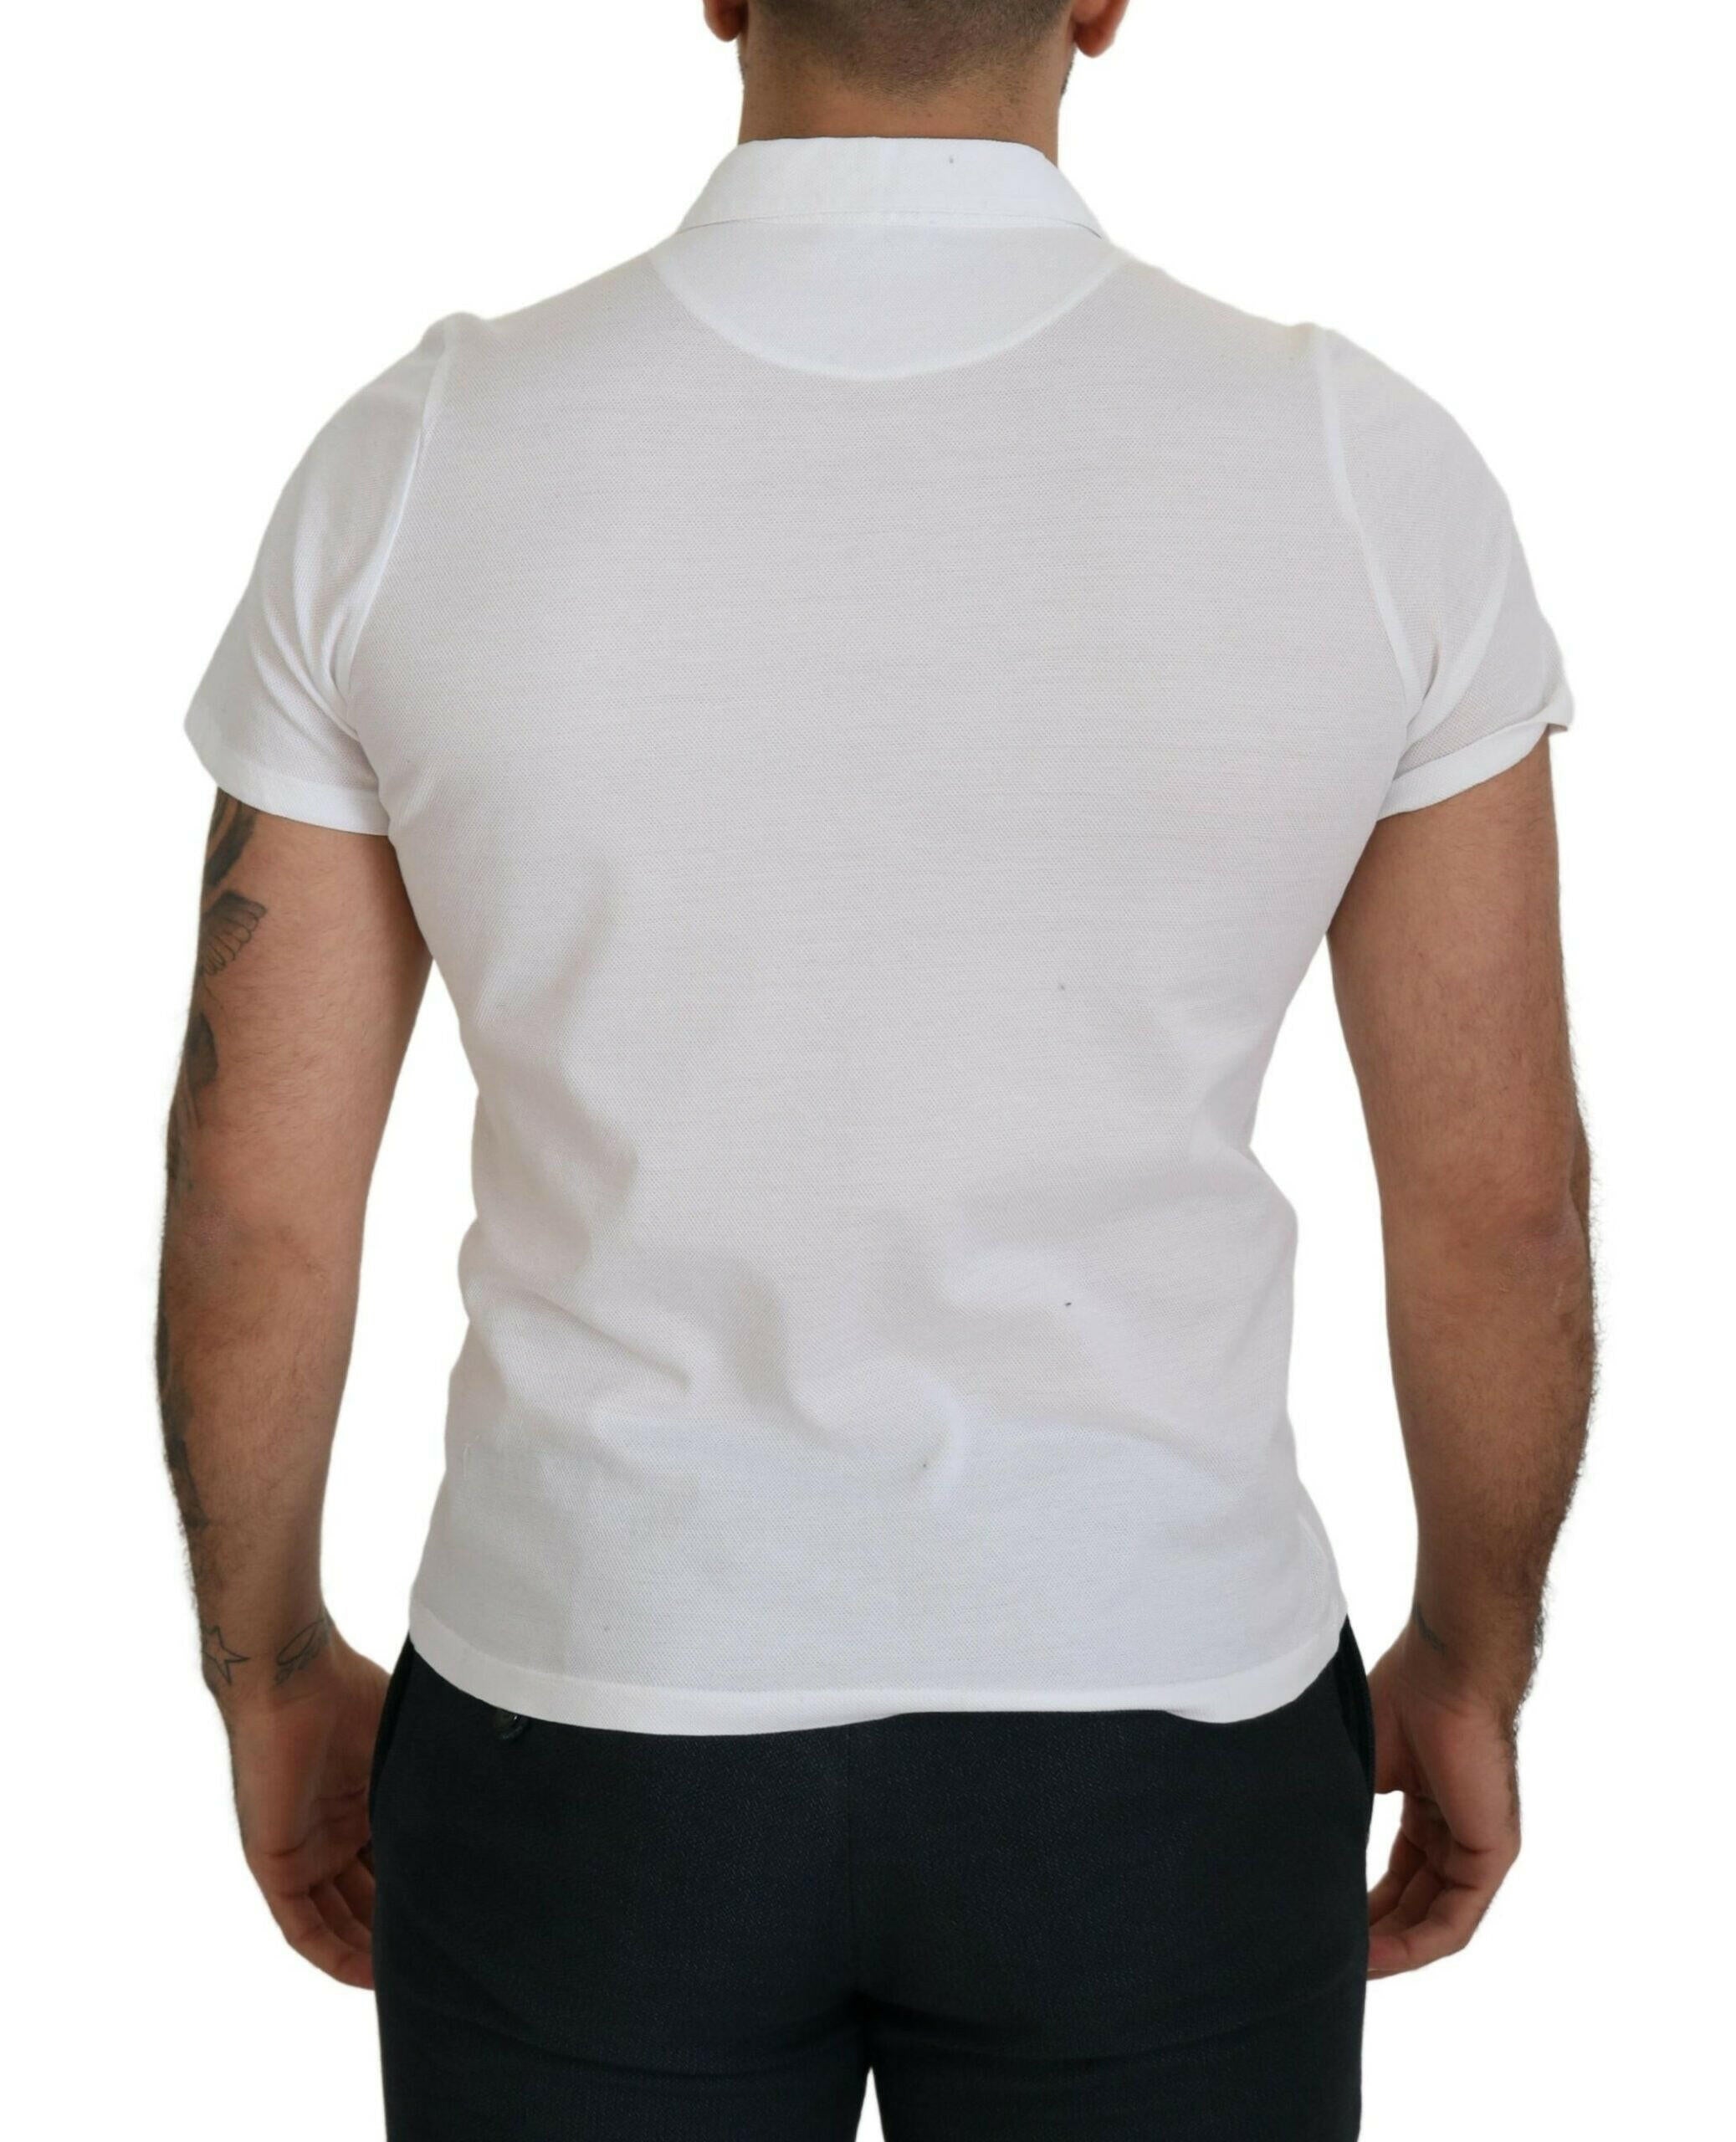 FRADI White Cotton Collared Short Sleeves Polo T-shirt - GENUINE AUTHENTIC BRAND LLC  